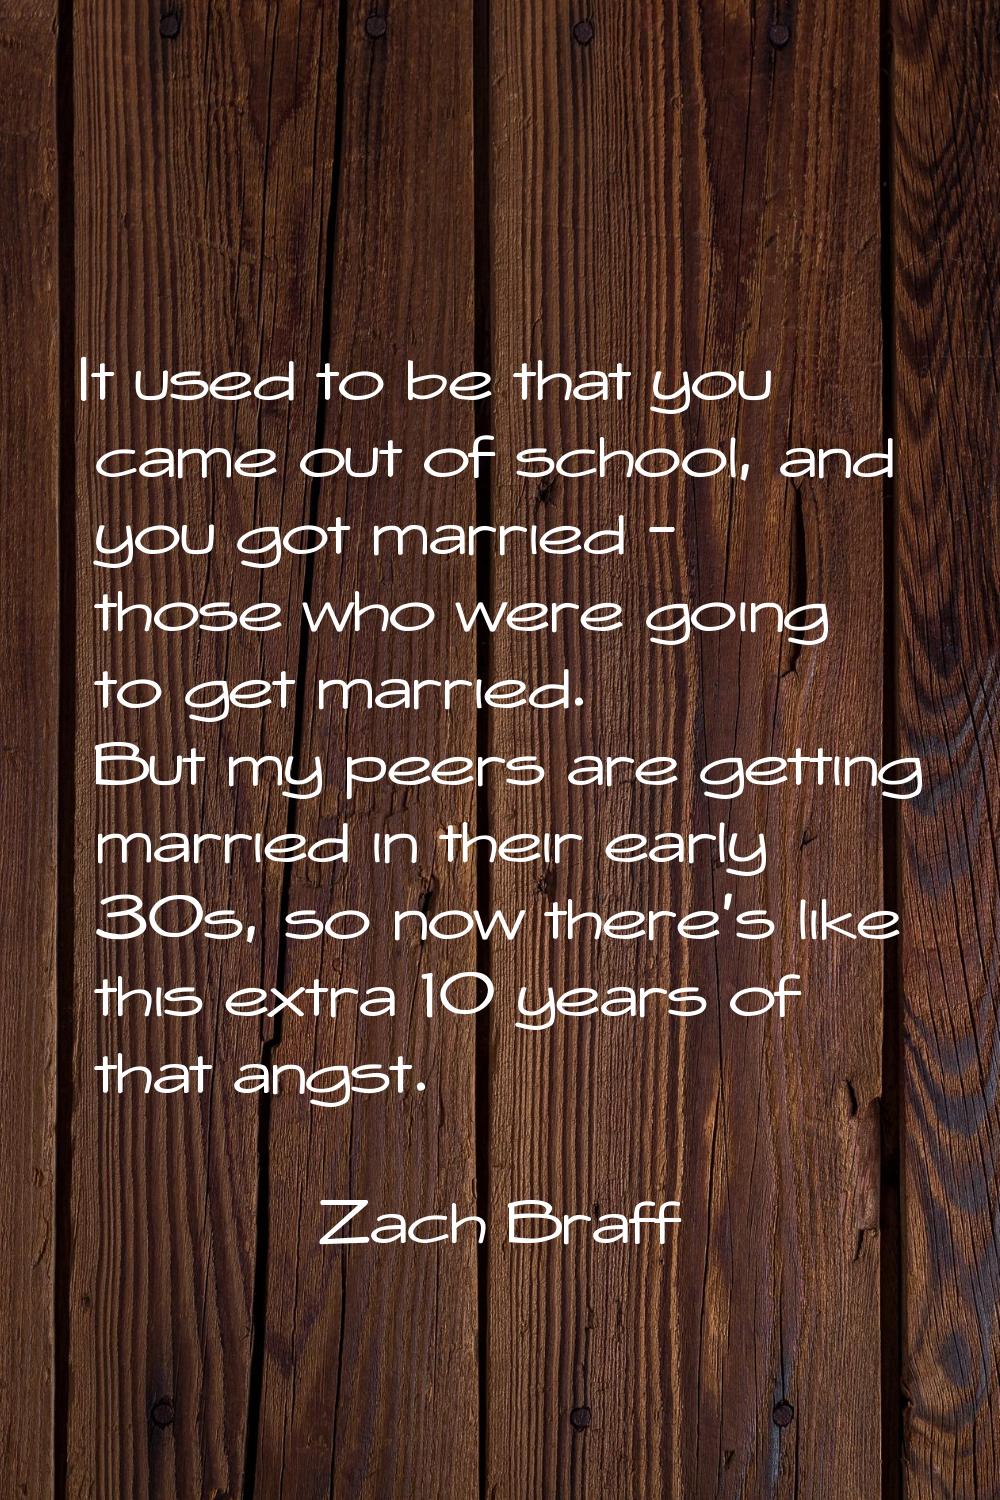 It used to be that you came out of school, and you got married - those who were going to get marrie